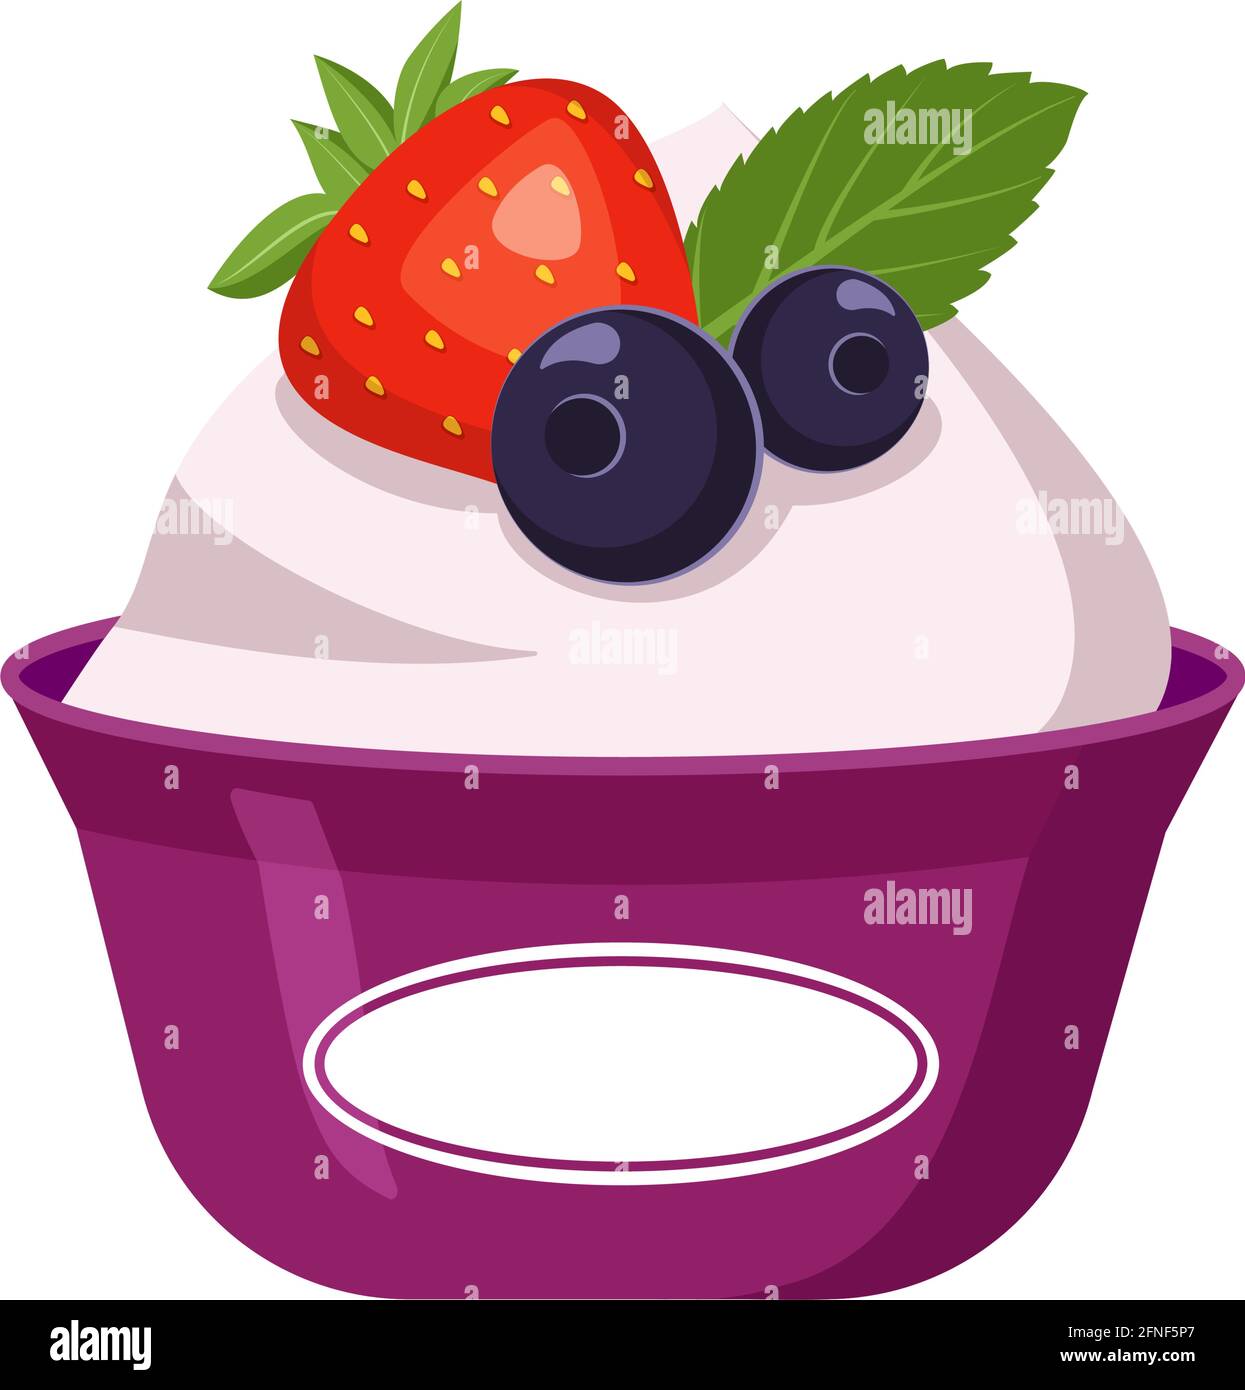 Yogurt icon in a plastic cup with berries. Delicious healthy breakfast or snack. Dairy products, a source of calcium Stock Vector